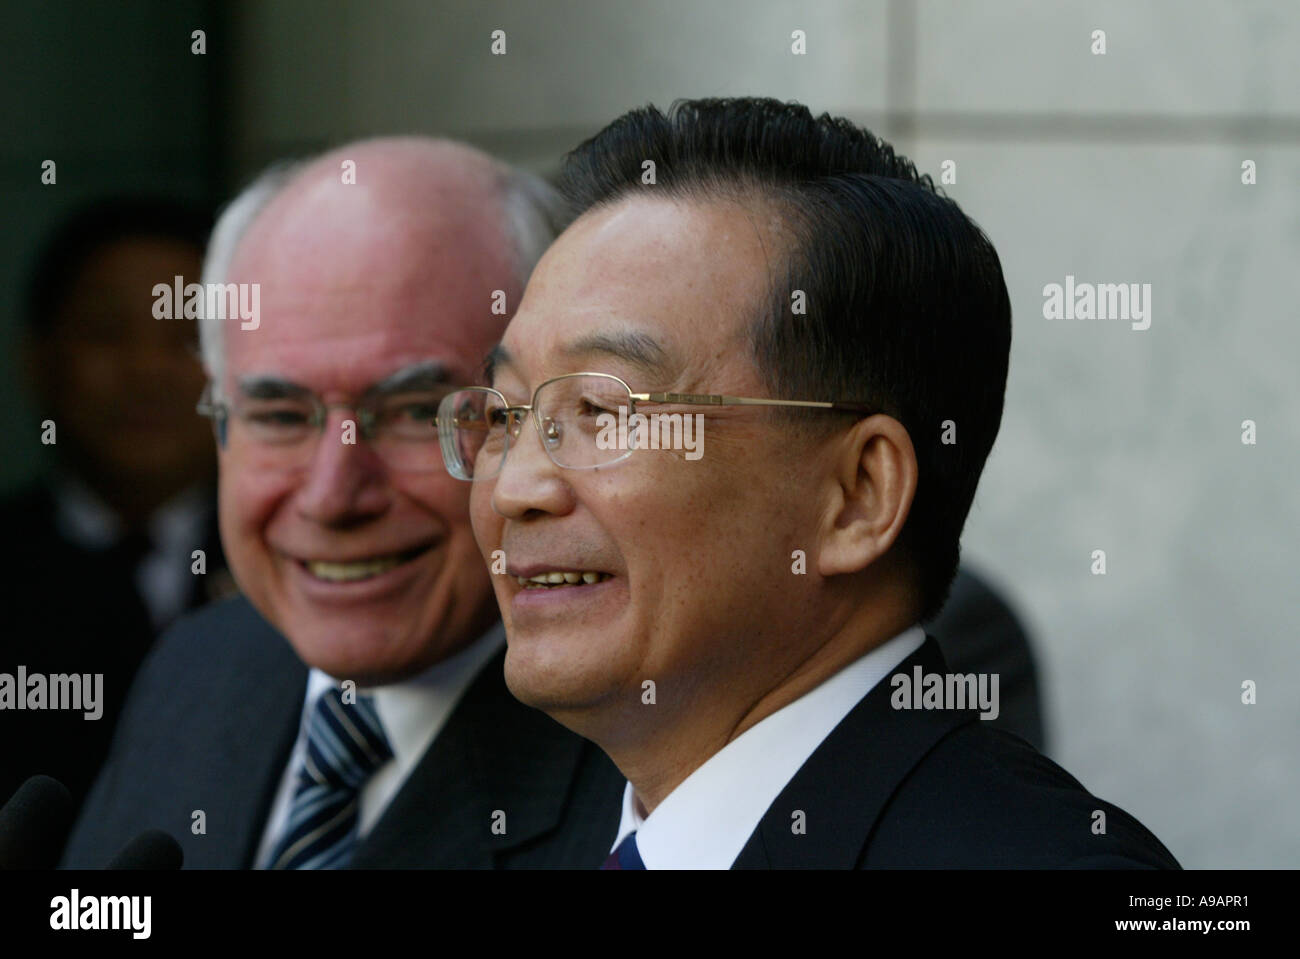 Premiere Chen Jiabao right and Prime Minister John Howard left at Press conference Canberra 2006 Stock Photo